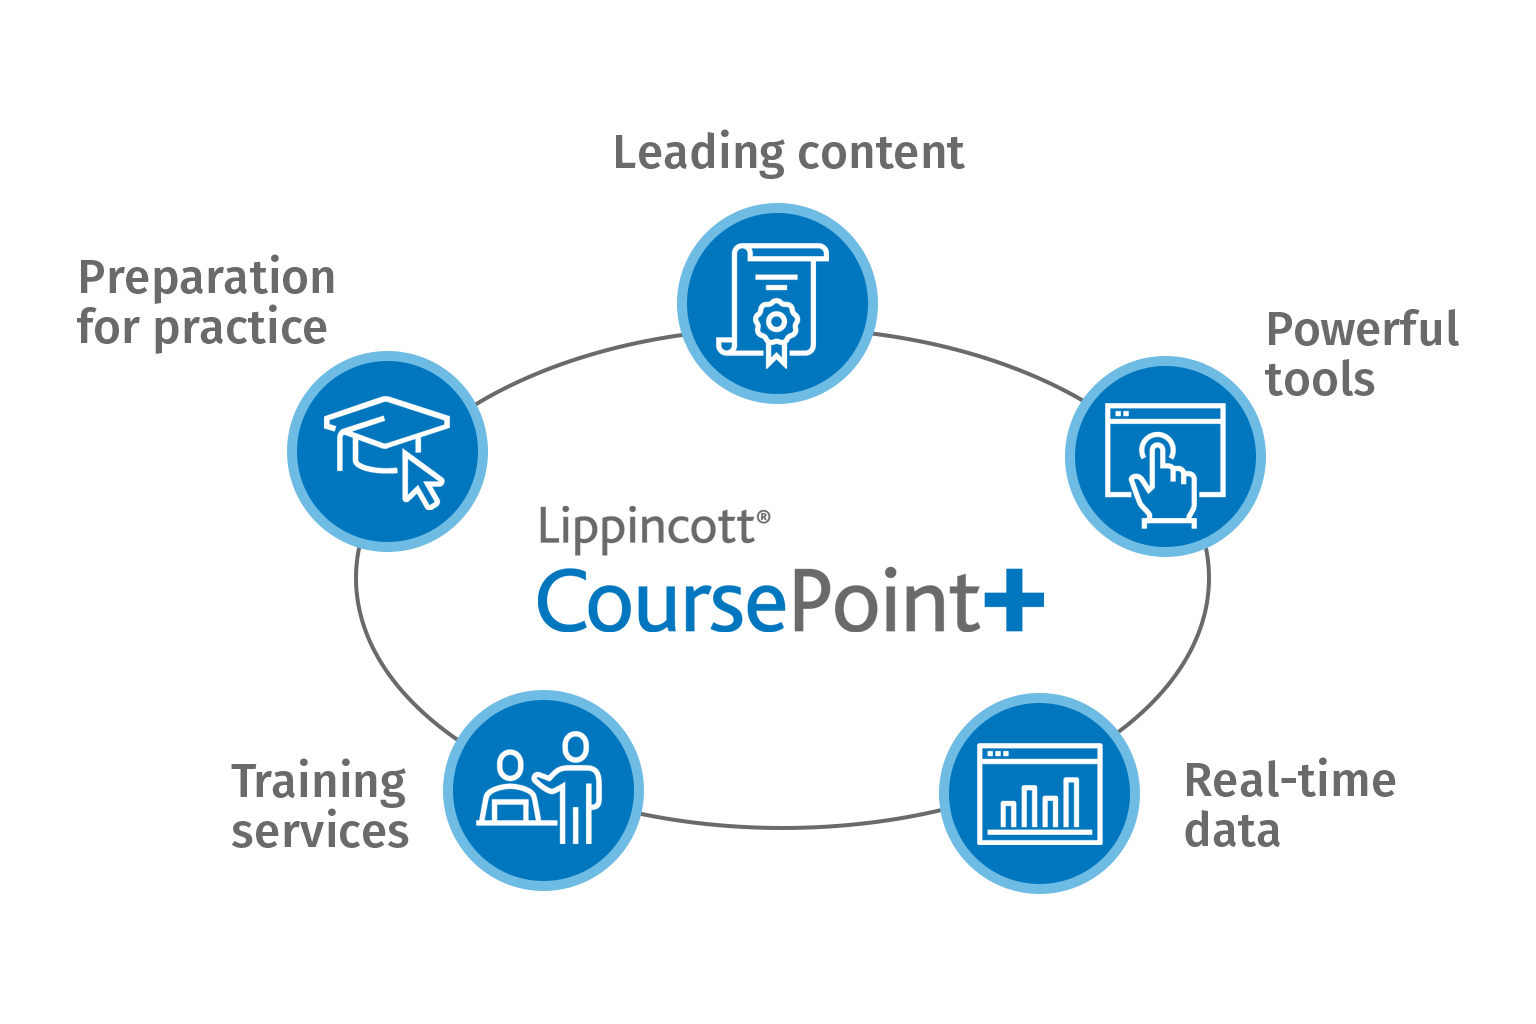 Lippincott CoursePoint+ has leading content, powerful tools, real-time data and training services to help your students in the preparation for practice